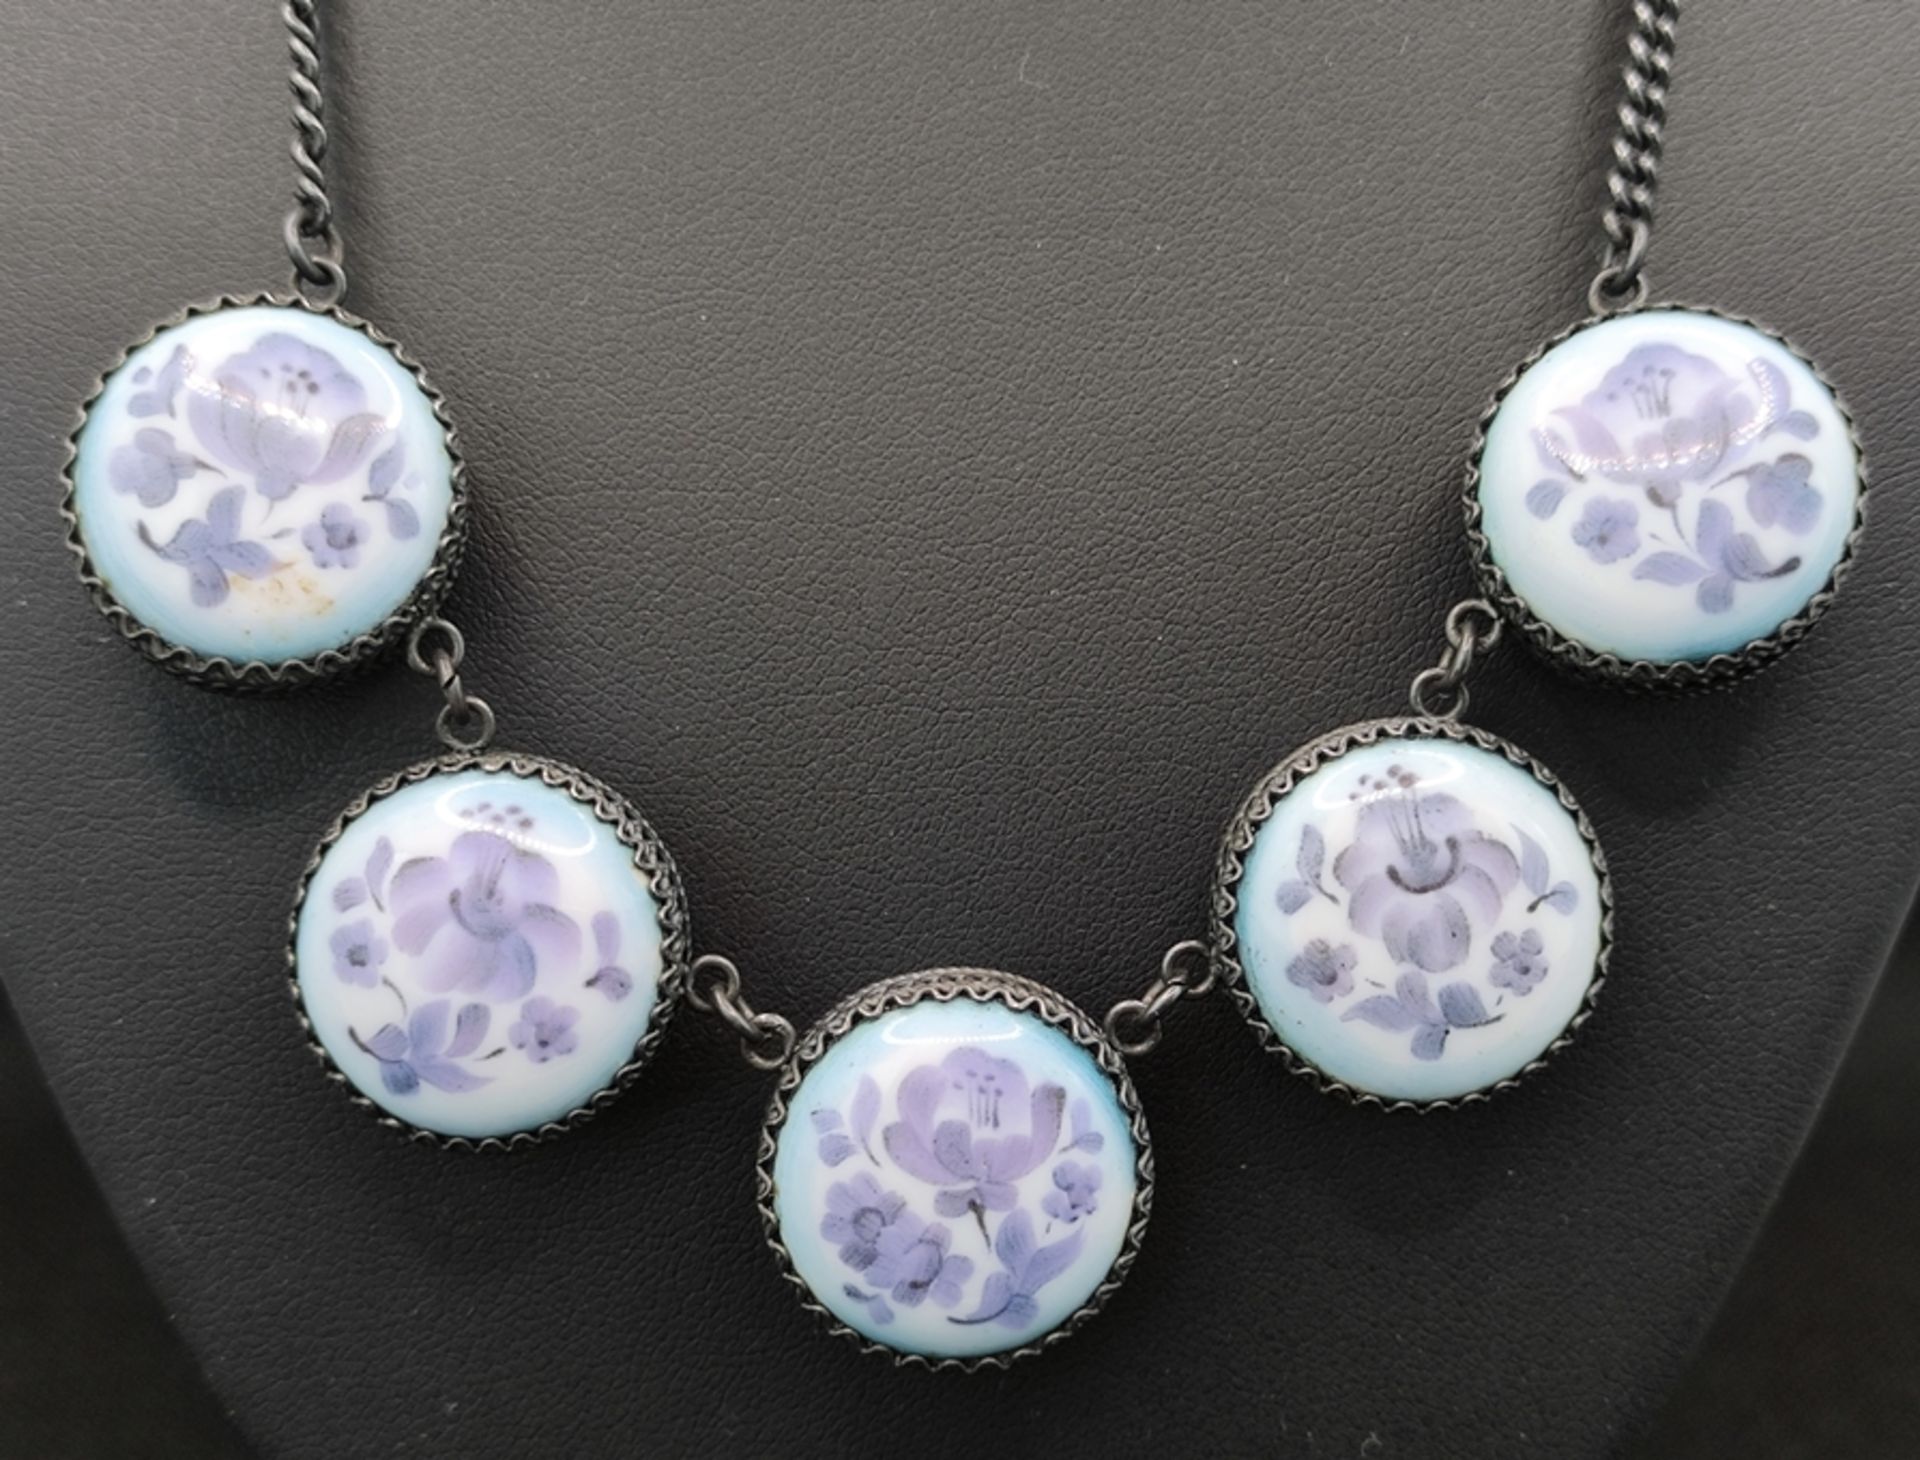 Porcelain necklace, middle part with 5 elements, these are decorated with purple flowers, length 48